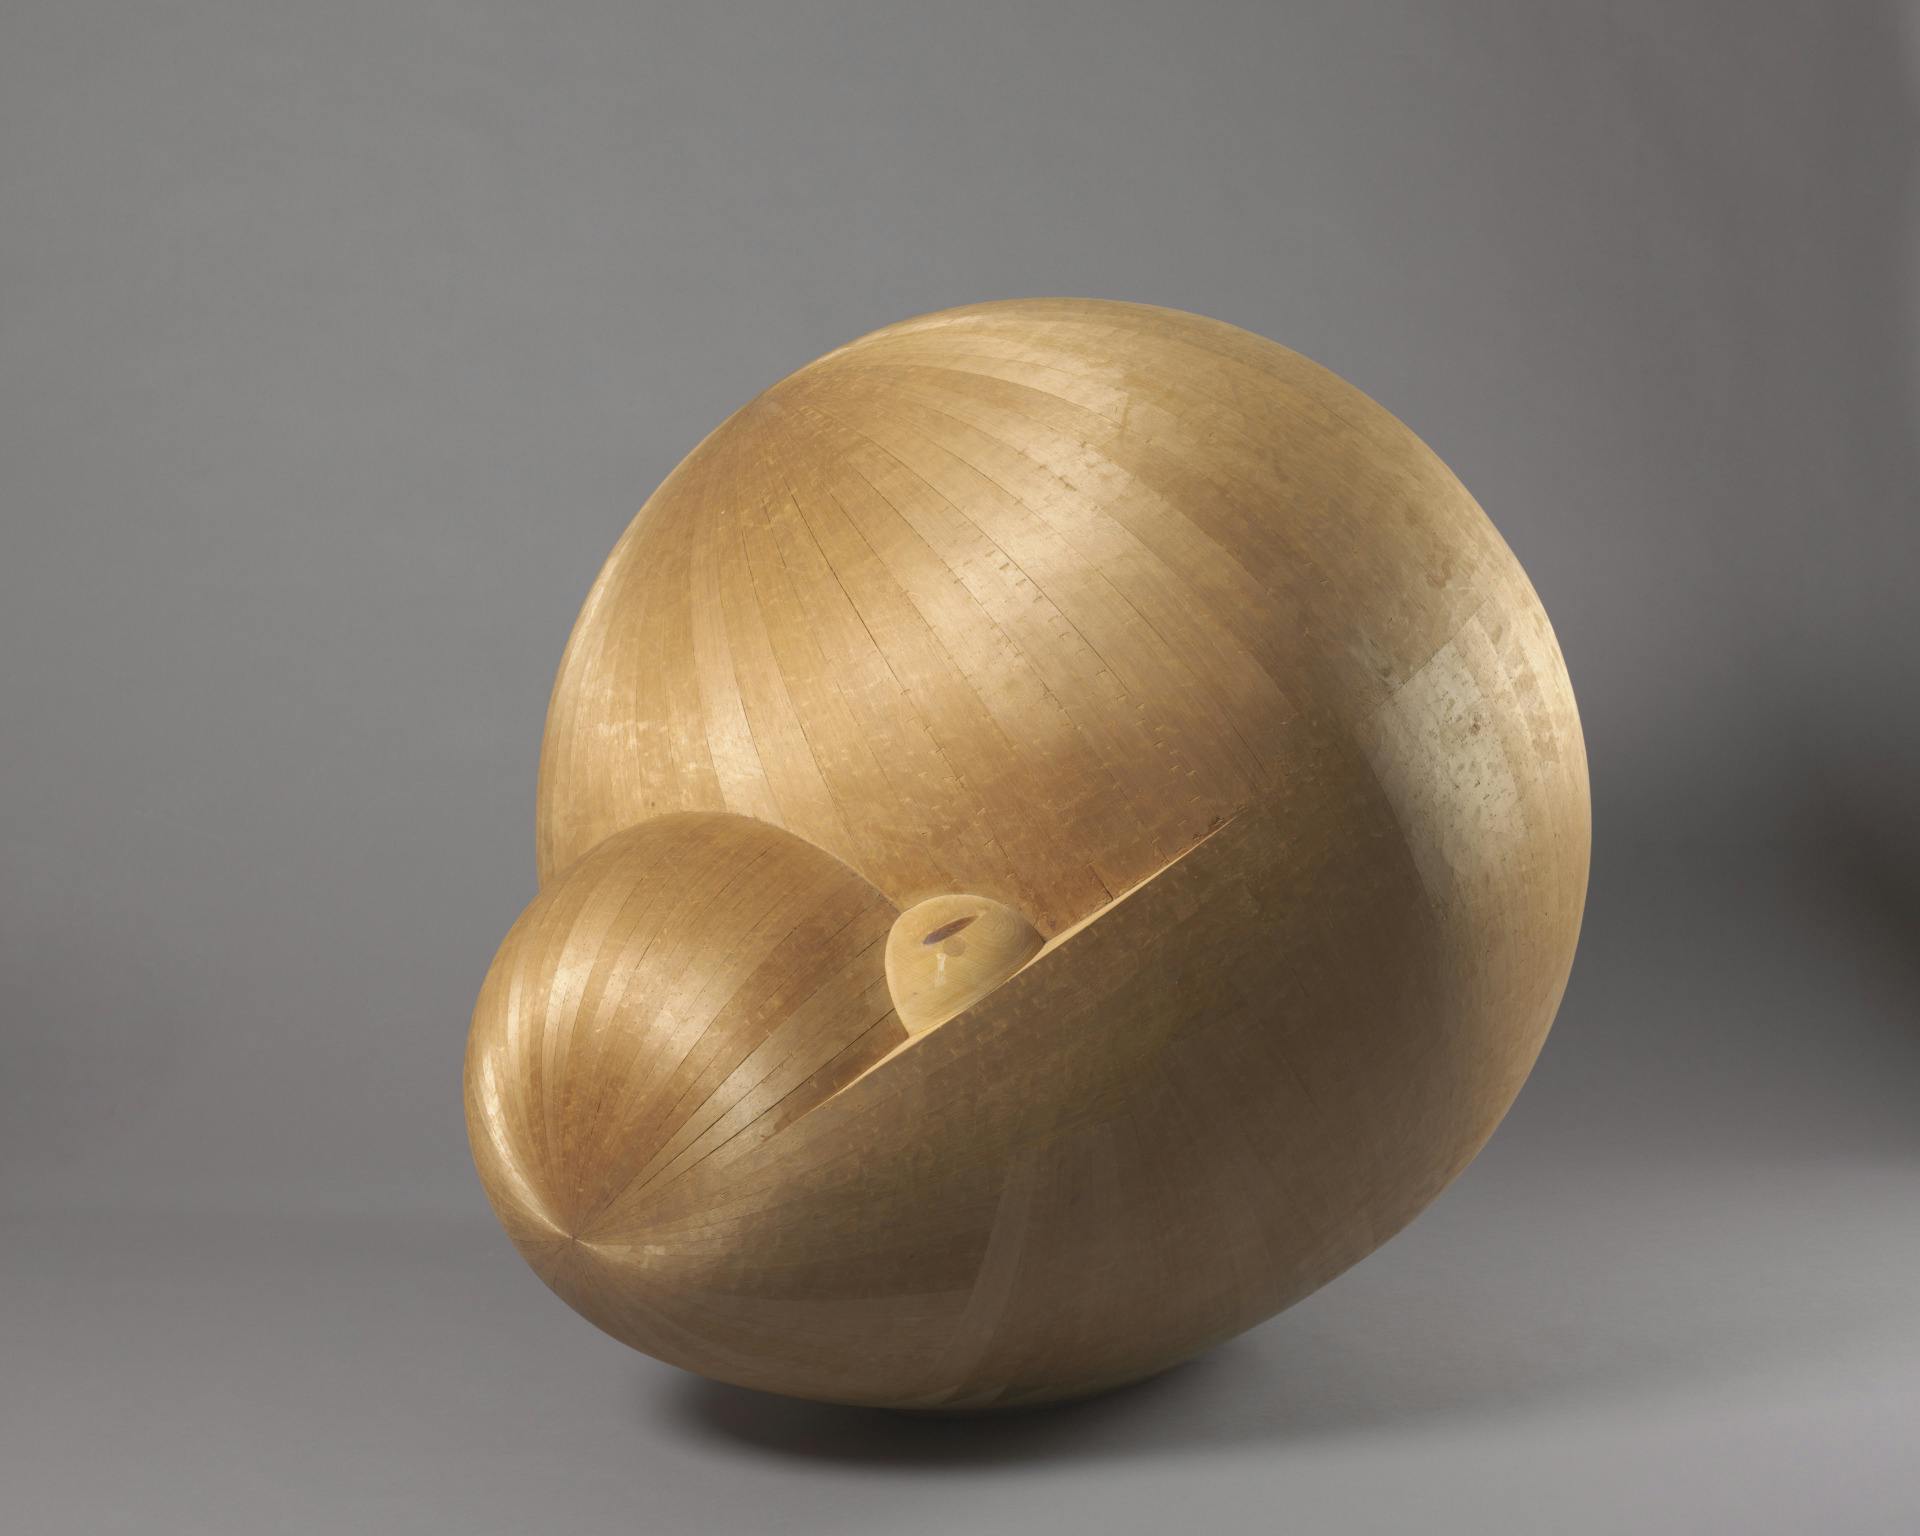 spherical straw colored sculpture with a soft sheen